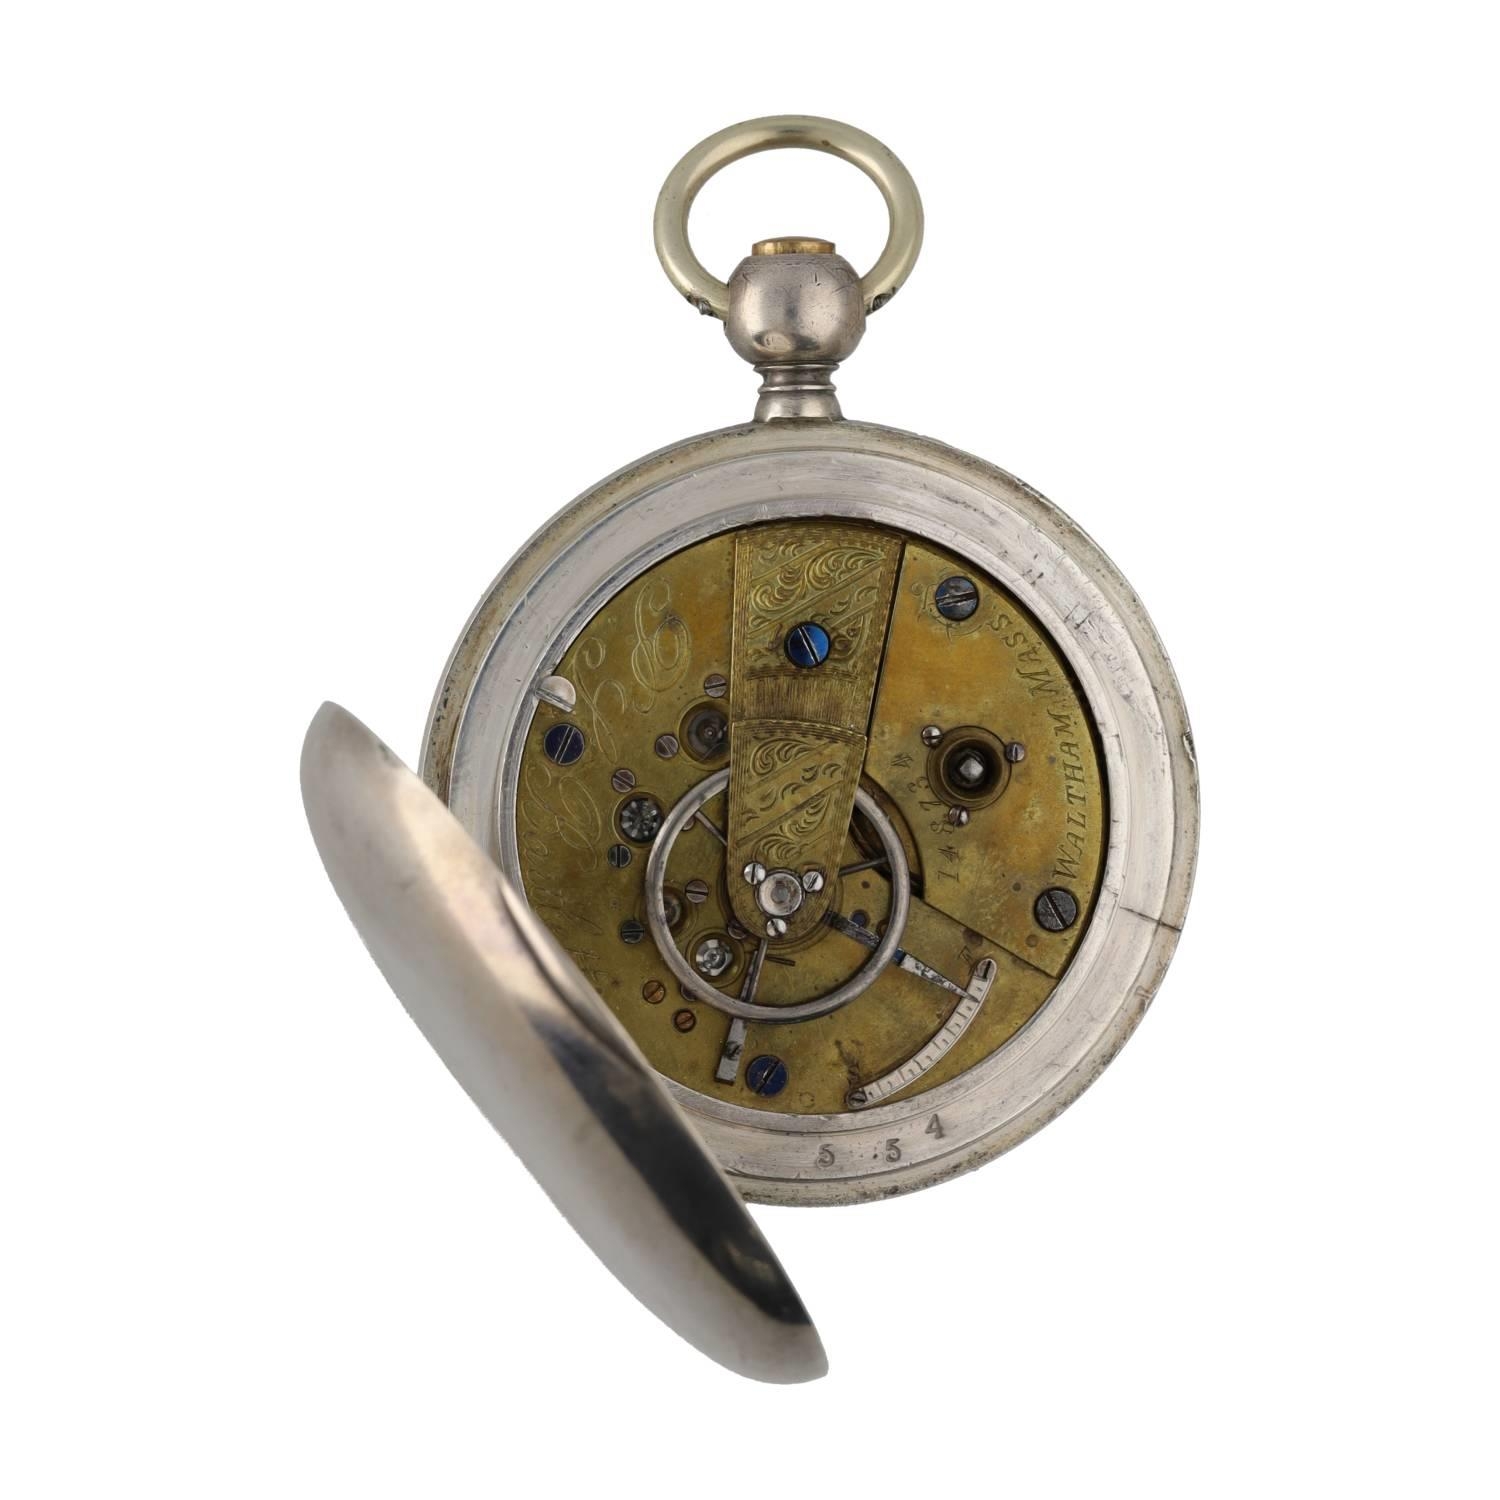 Early American Waltham 'P.S. Bartlett' lever hunter pocket watch, circa 1864, serial no. 148734, - Image 3 of 5